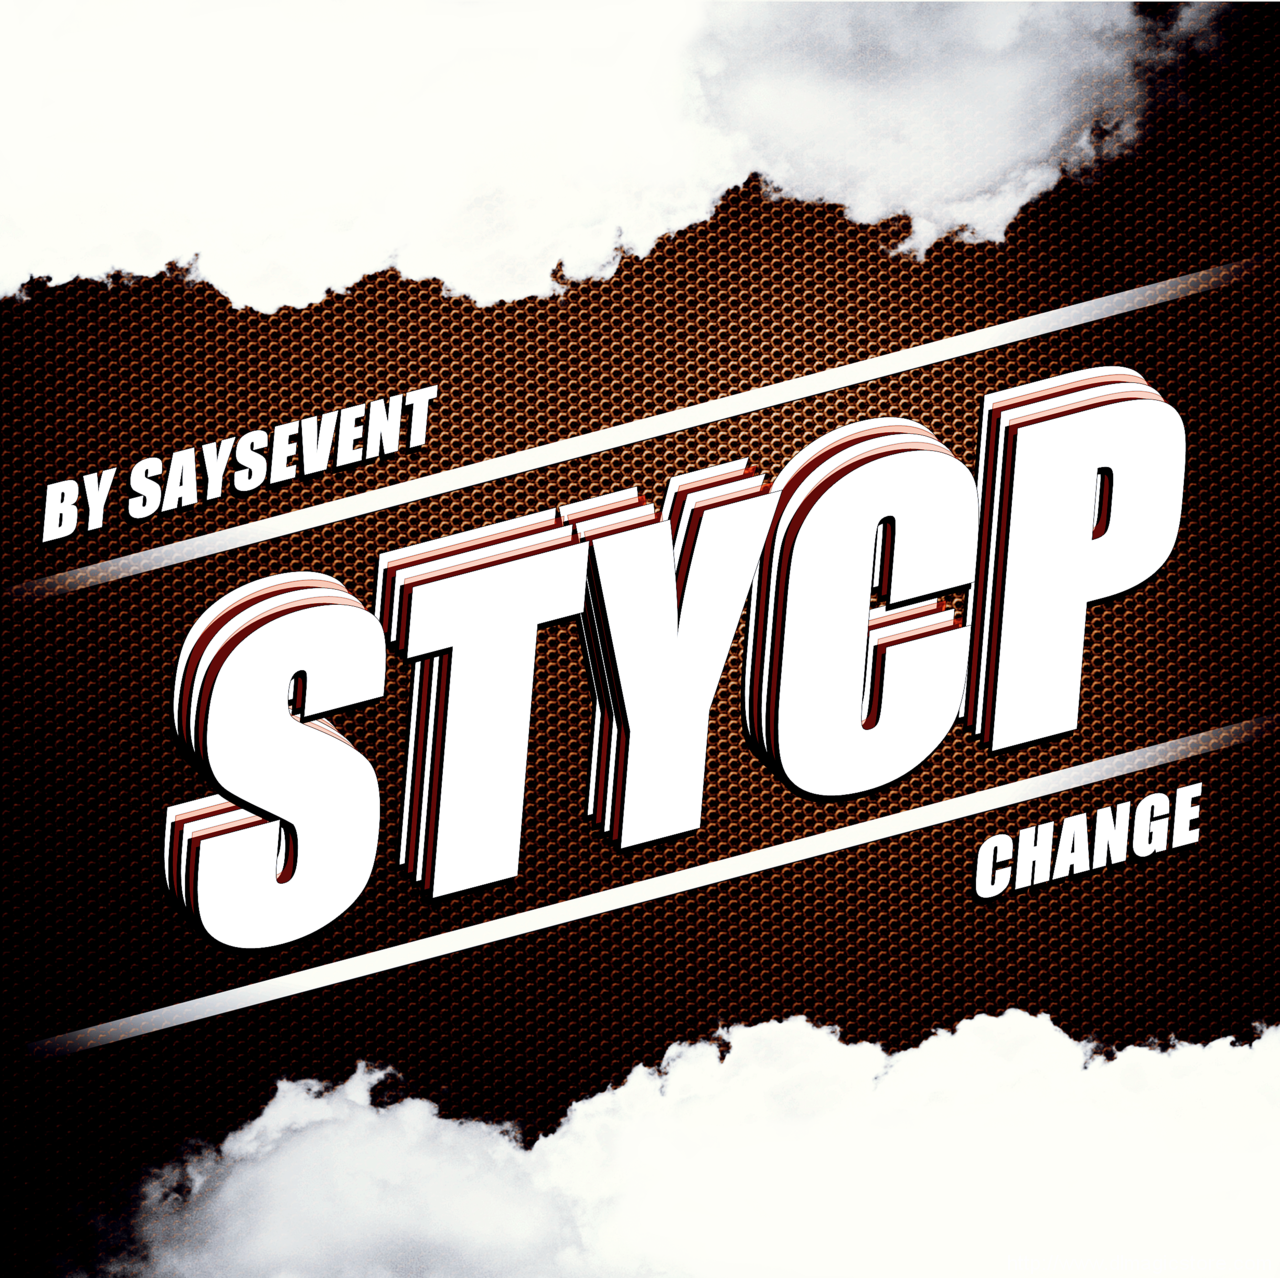 STYCP change by SaysevenT (Instant Download)